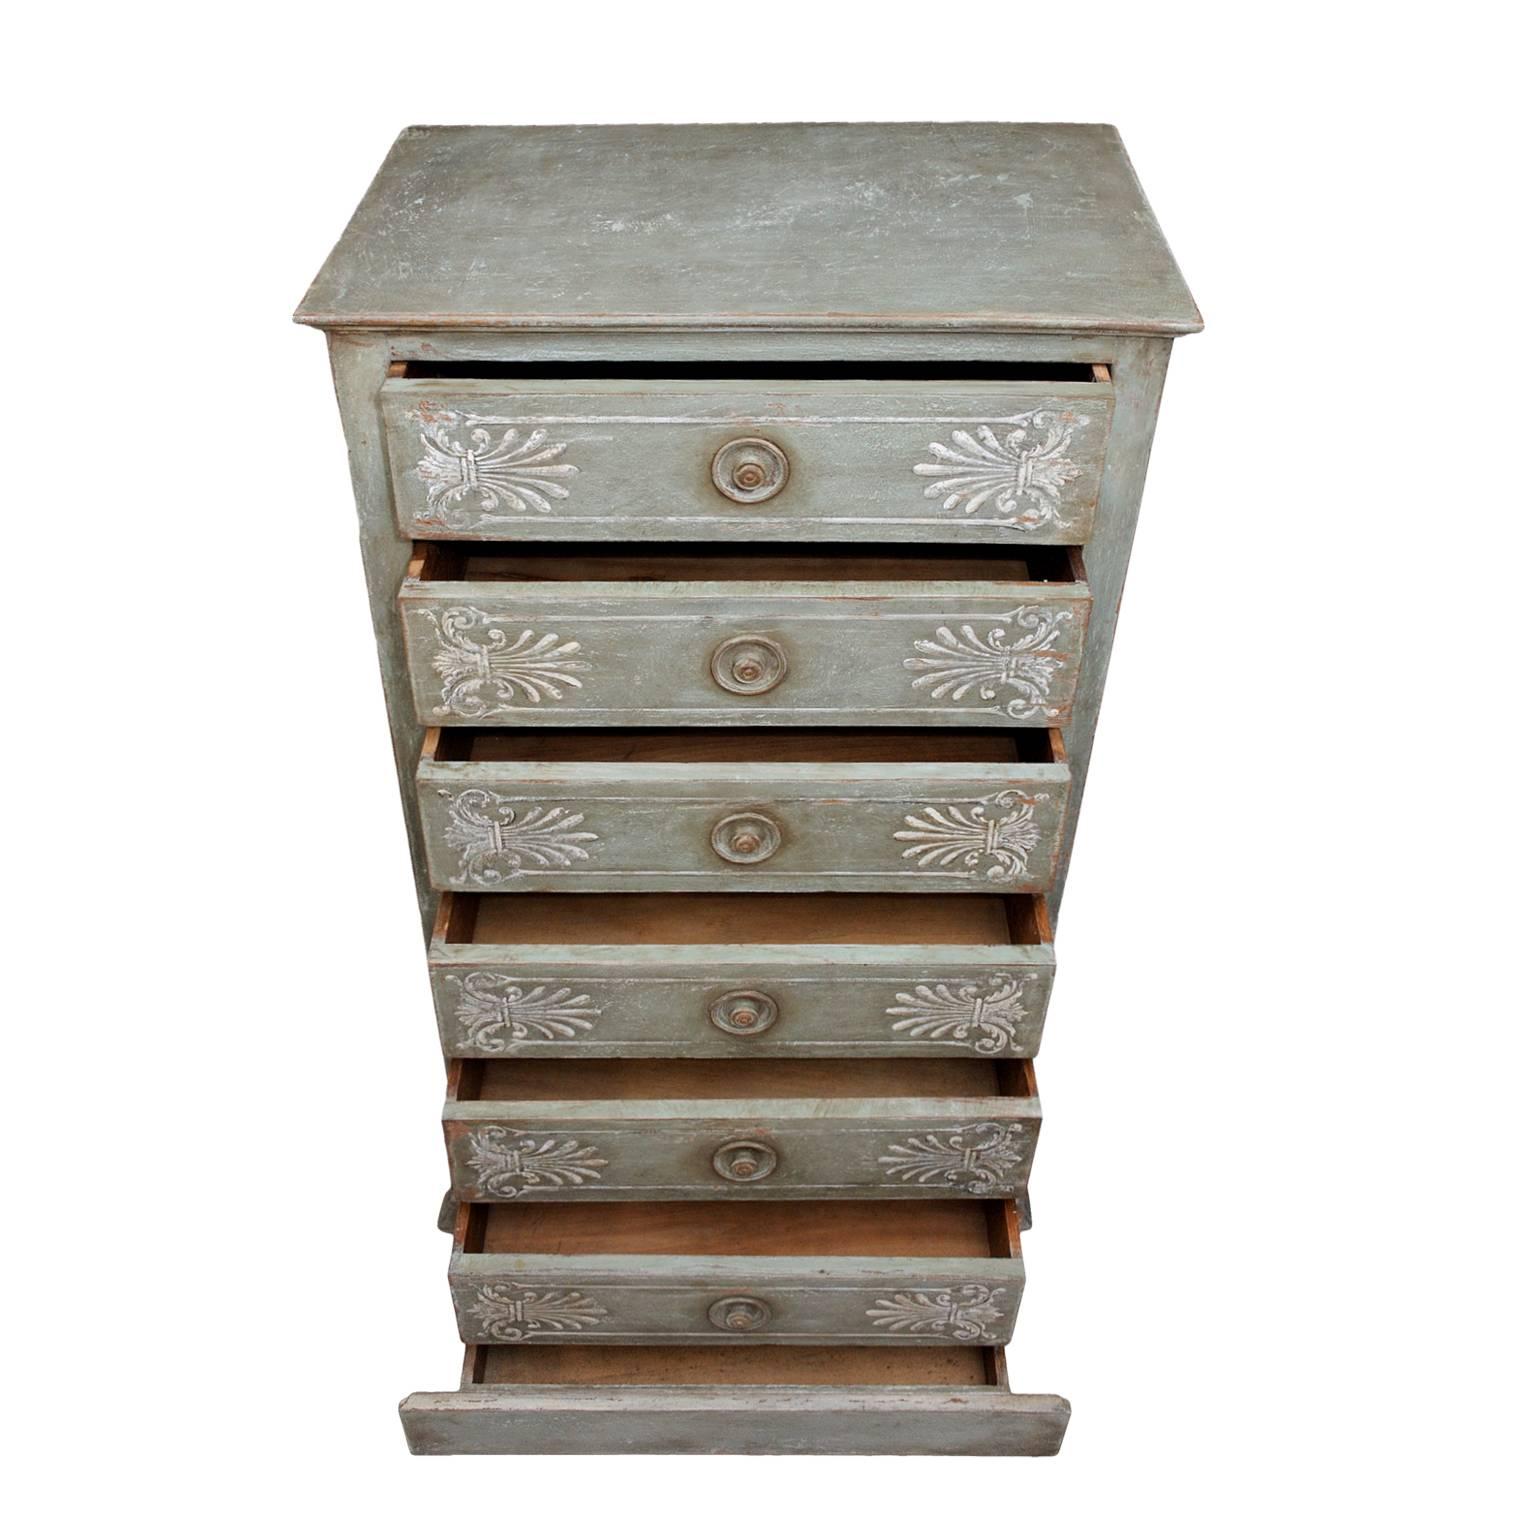 This is a beautiful and wonderfully proportioned French Empire style early 19th Century tall Seven-Drawer Oak commode/chest of drawers. The paintwork has been refreshed, circa 1830.

